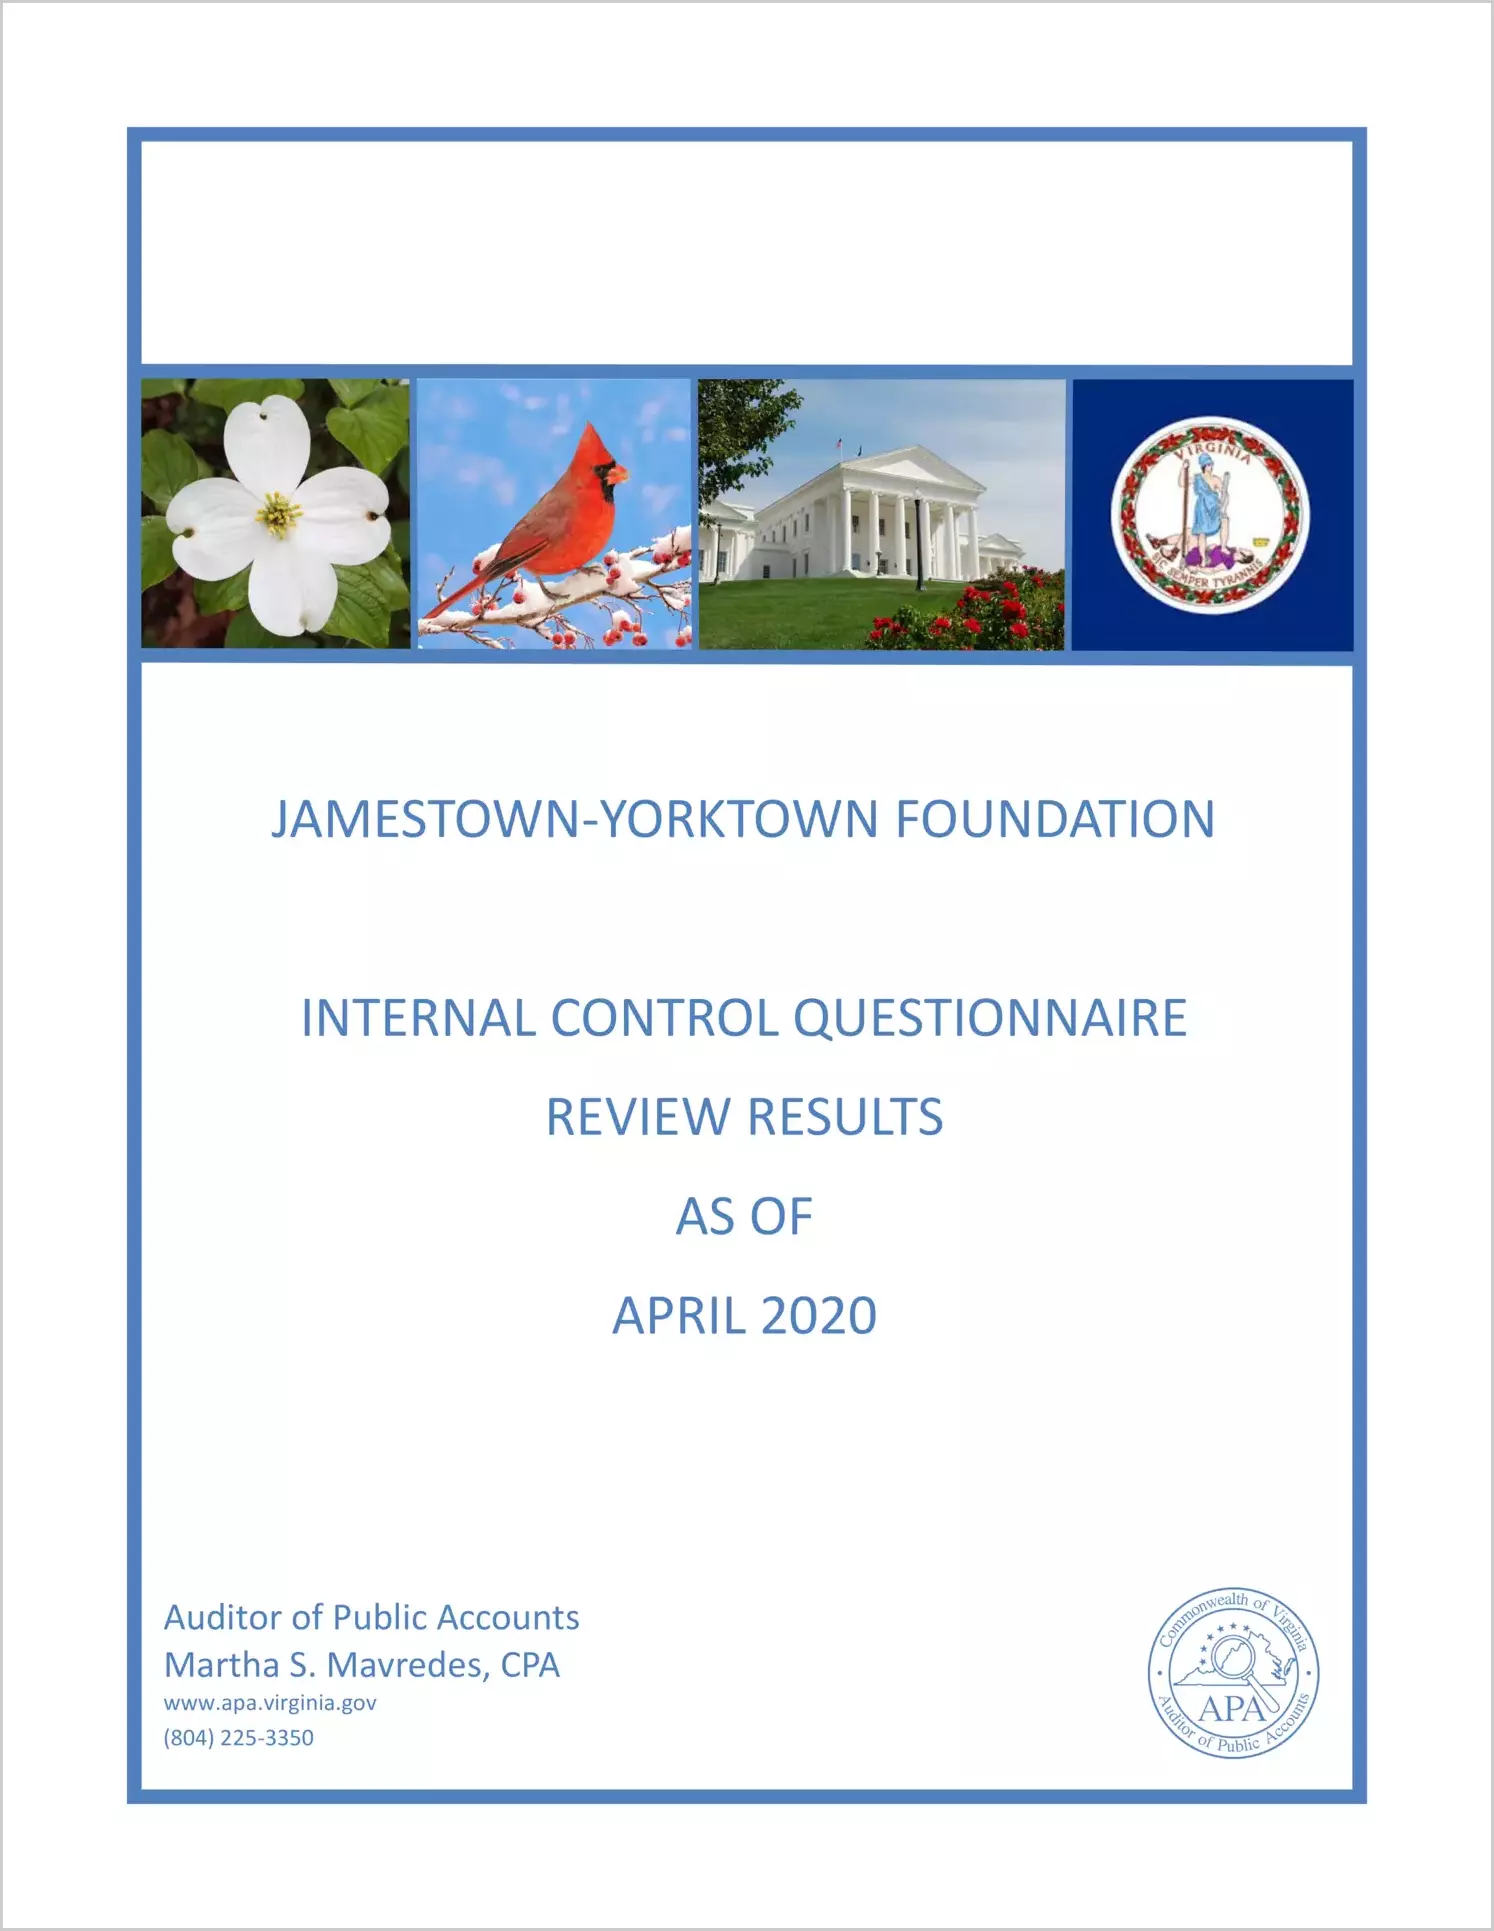 Jamestown-Yorktown Foundation Internal Control Questionnaire Review Results as of April 2020